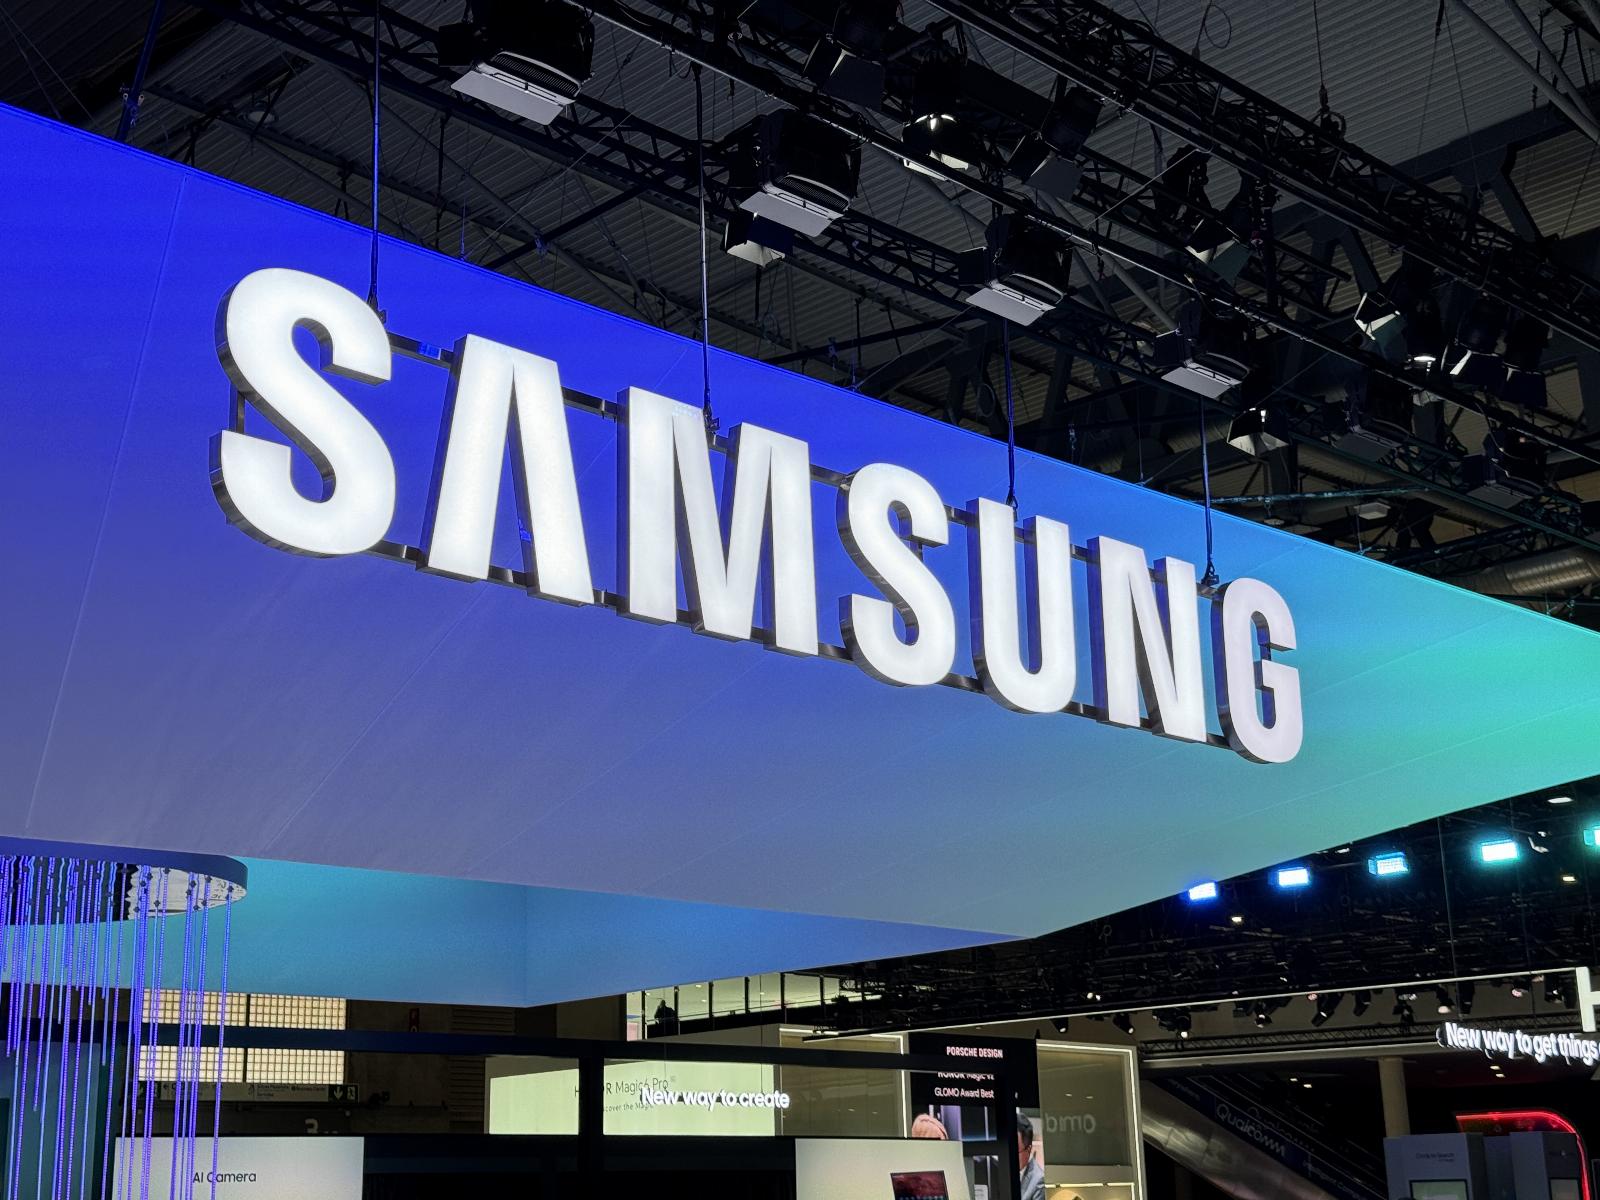 Samsung’s operating profit soars 930% as AI tailwinds drive demand for memory chips